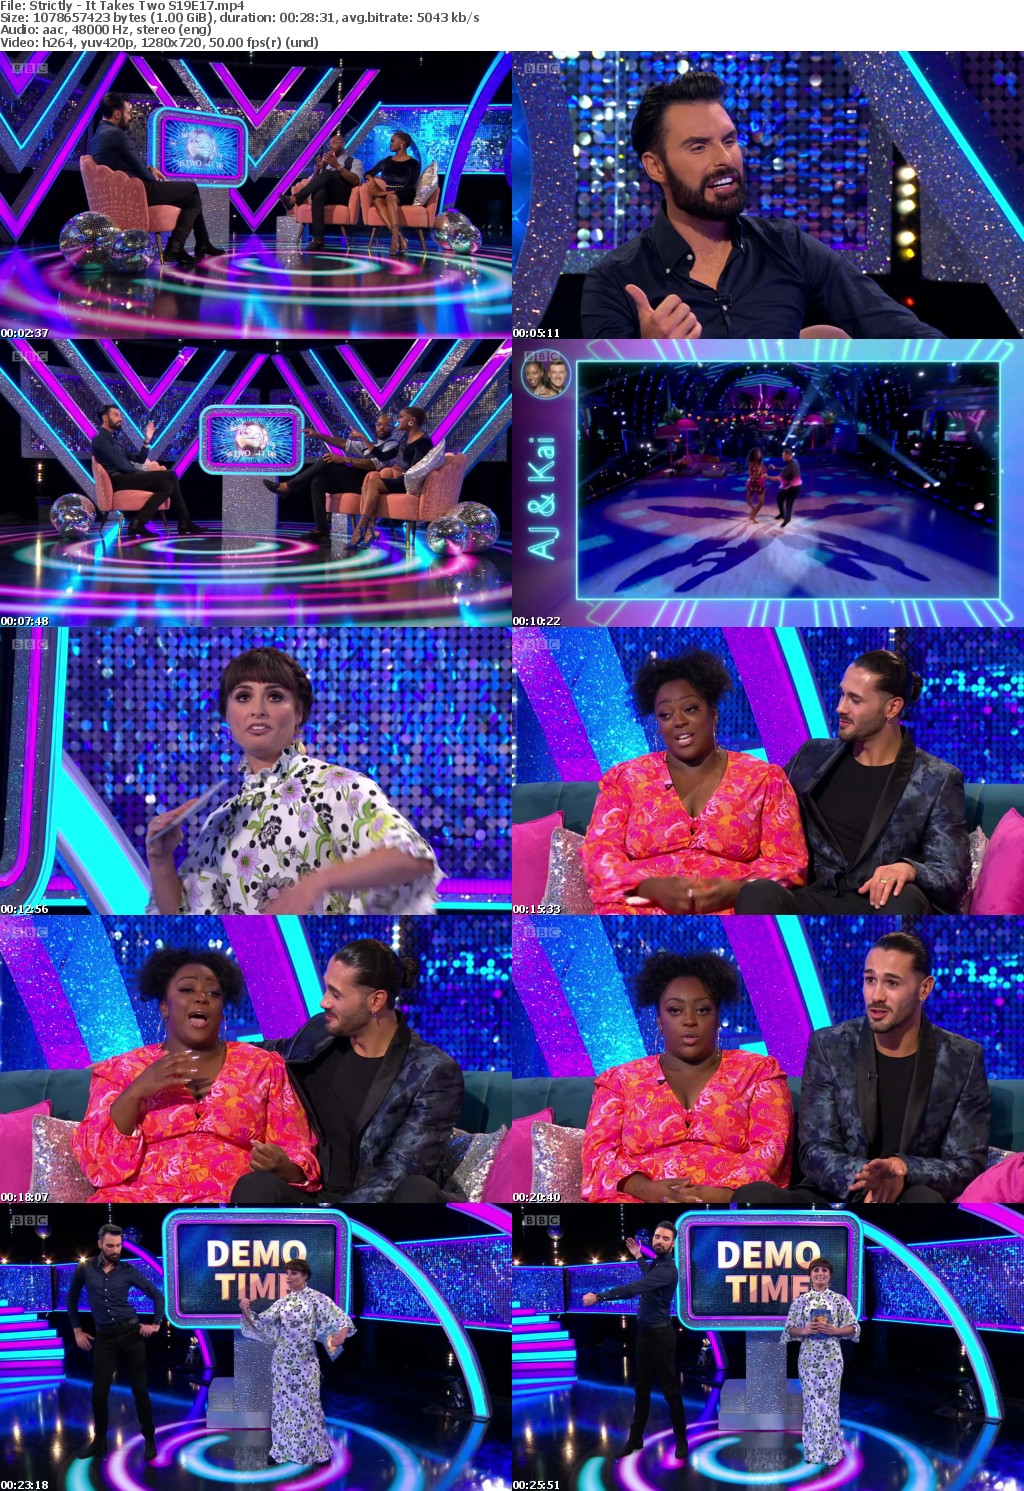 Strictly - It Takes Two S19E17 (1280x720p HD, 50fps, soft Eng subs)